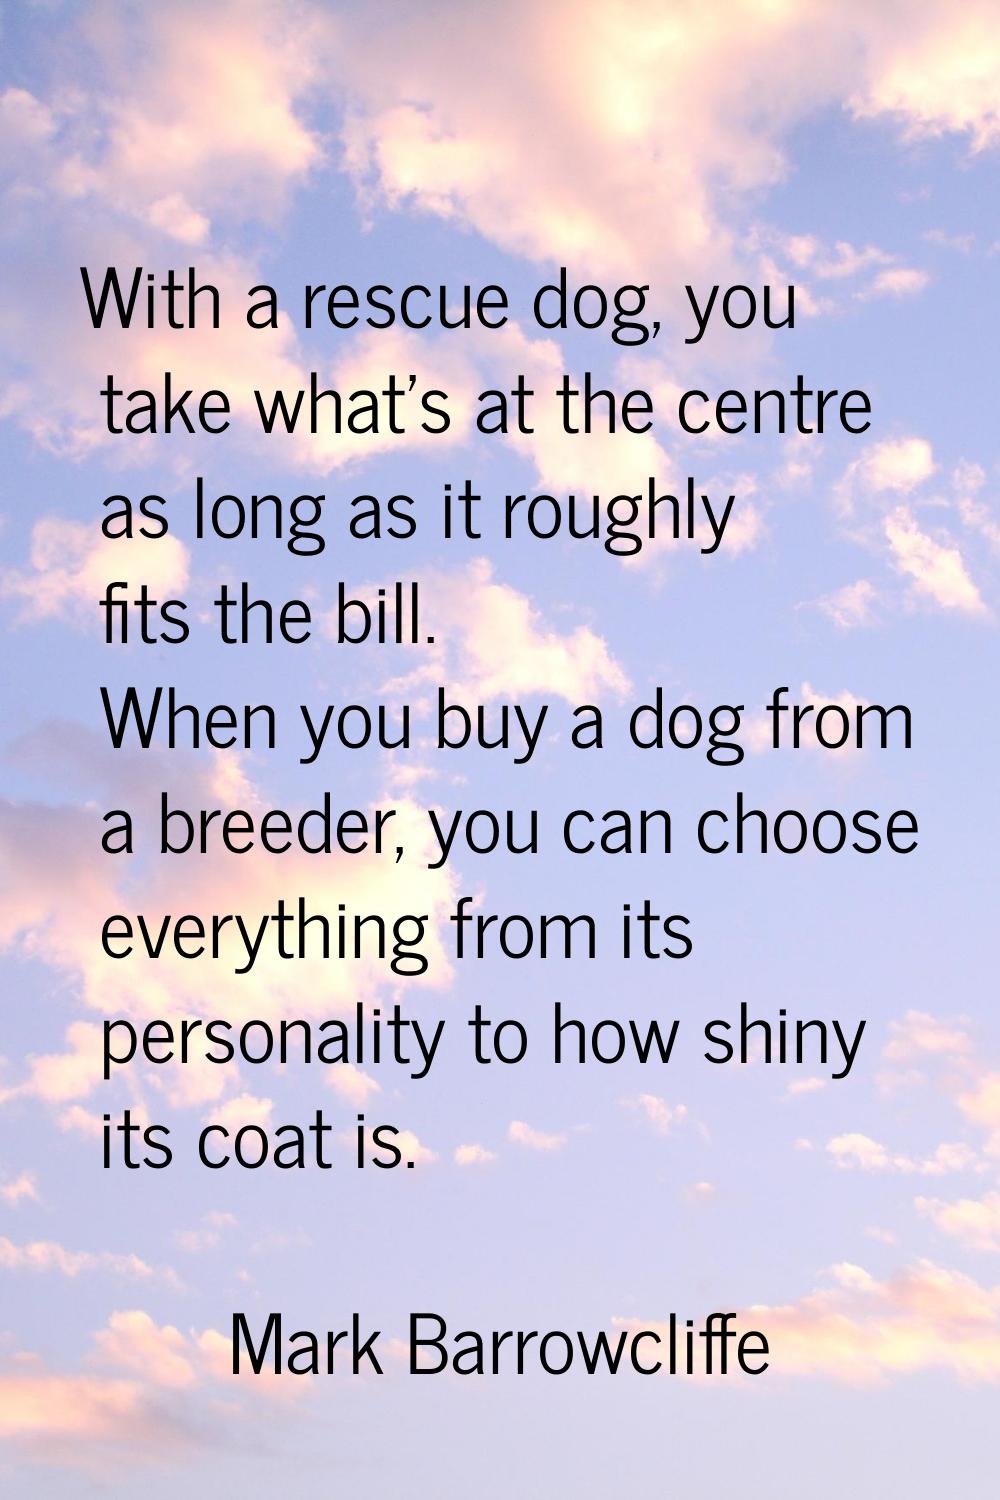 With a rescue dog, you take what's at the centre as long as it roughly fits the bill. When you buy 